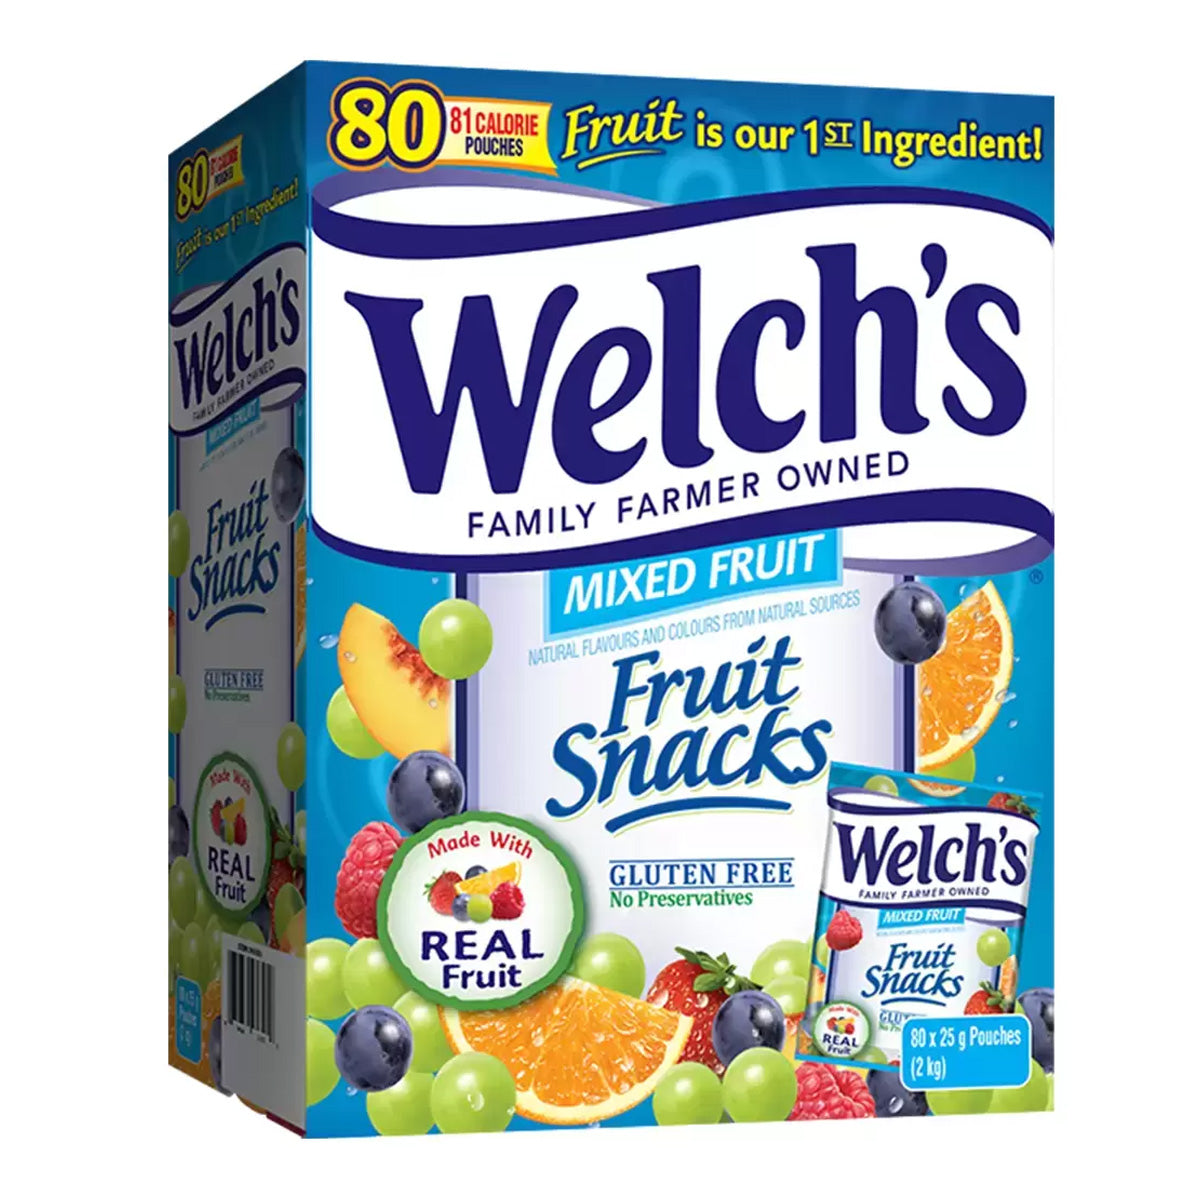 Welch's Mixed Fruit Snacks Real Fruit Pouches 25g 